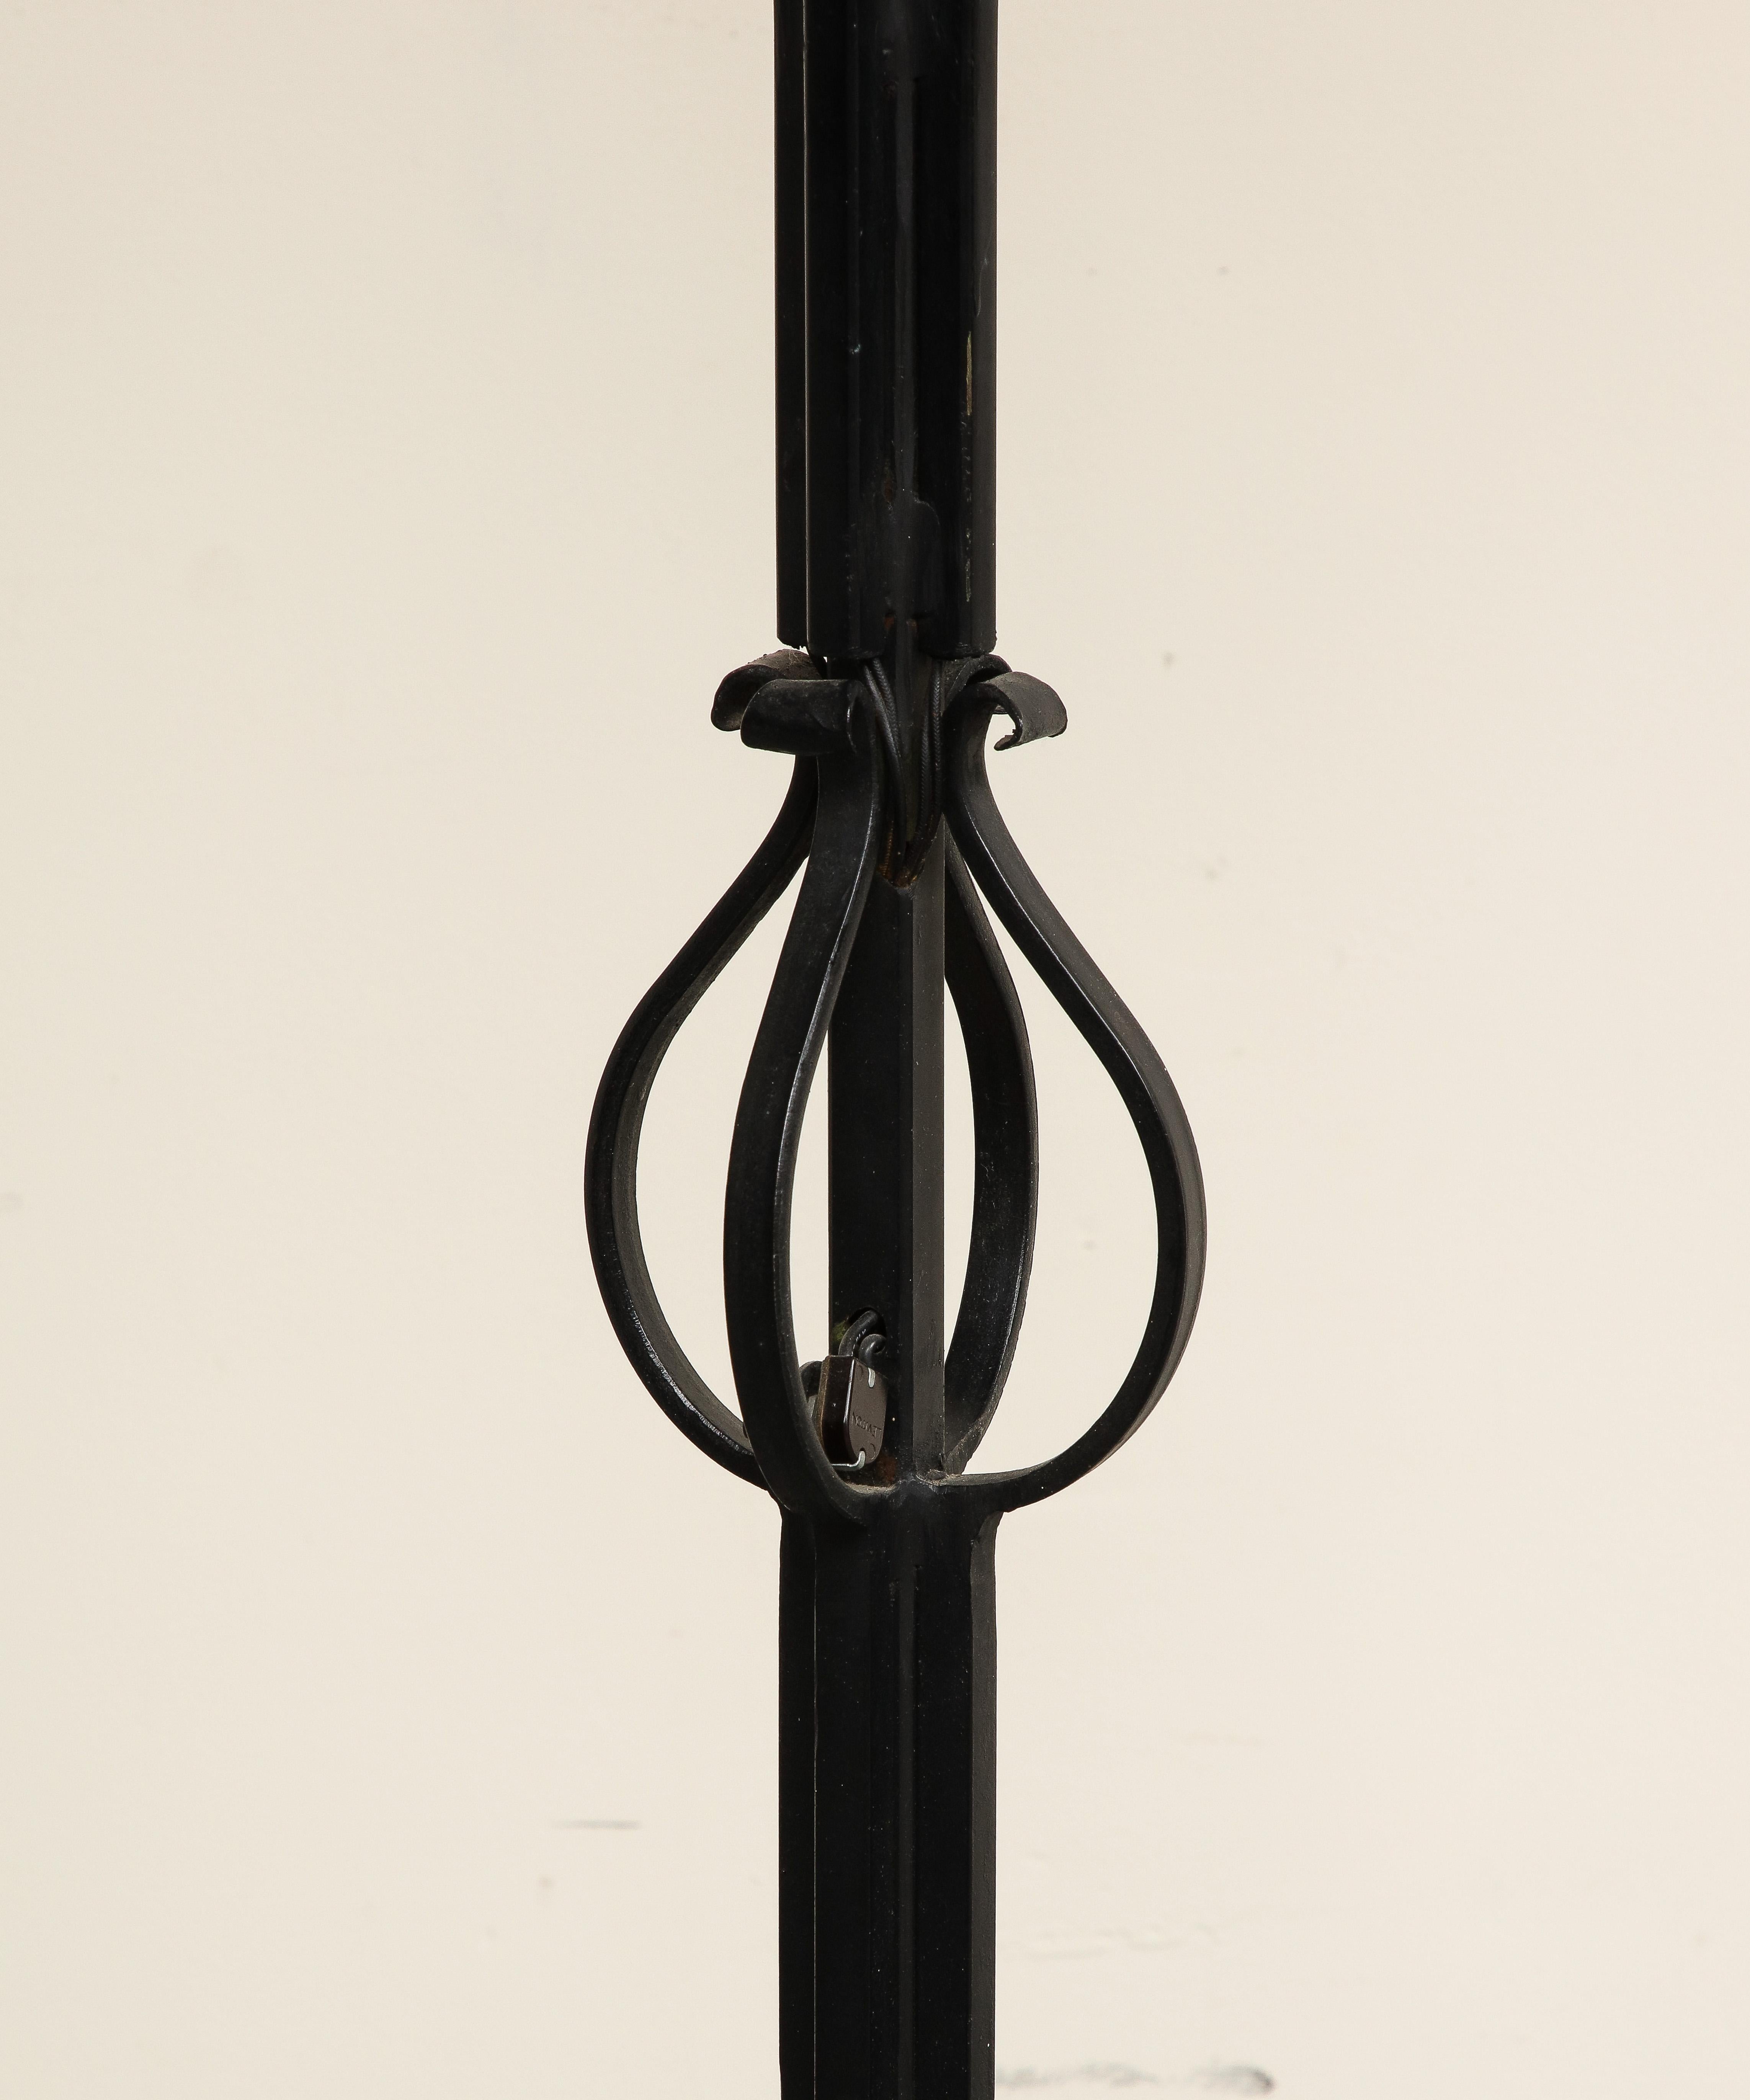 Midcentury Iron Candlestick Floor Lamp, attributed to Tommi Parzinger For Sale 5